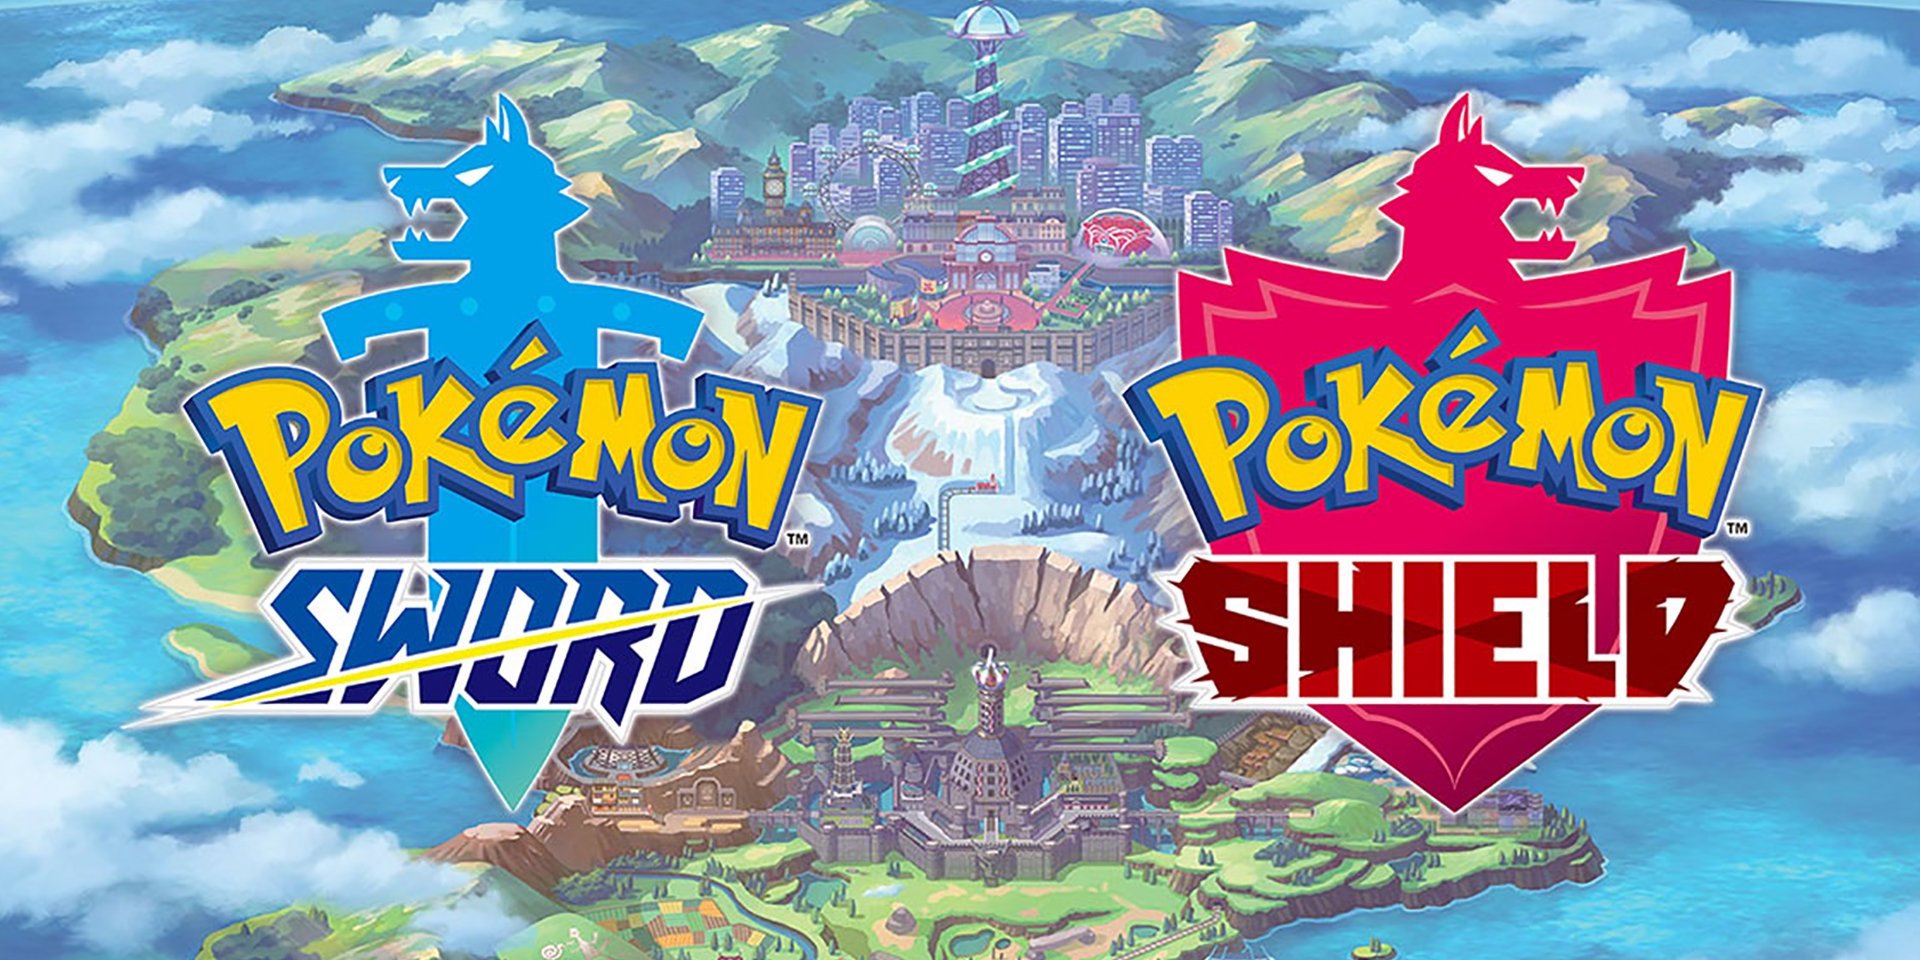 Pokémon Sword' vs 'Pokémon Shield': Exclusives, differences & which to buy